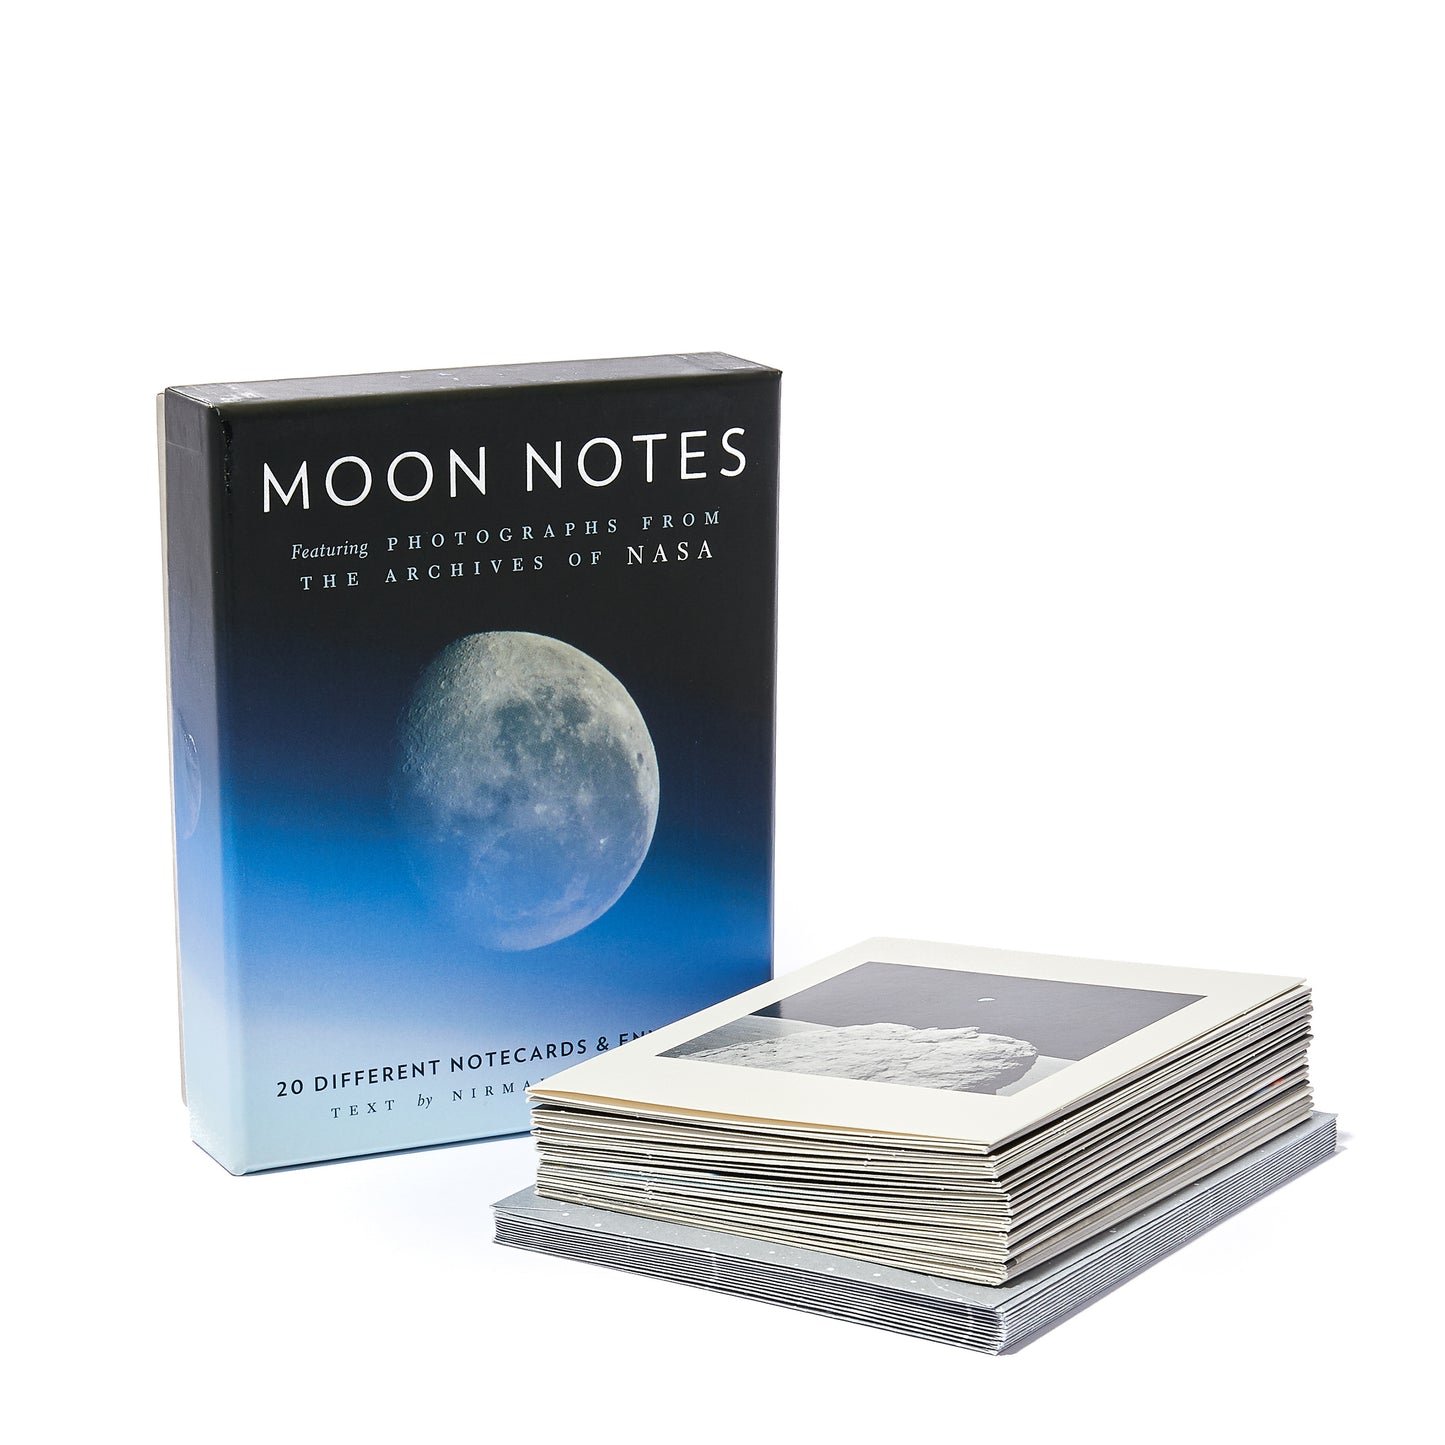 MOON NOTES